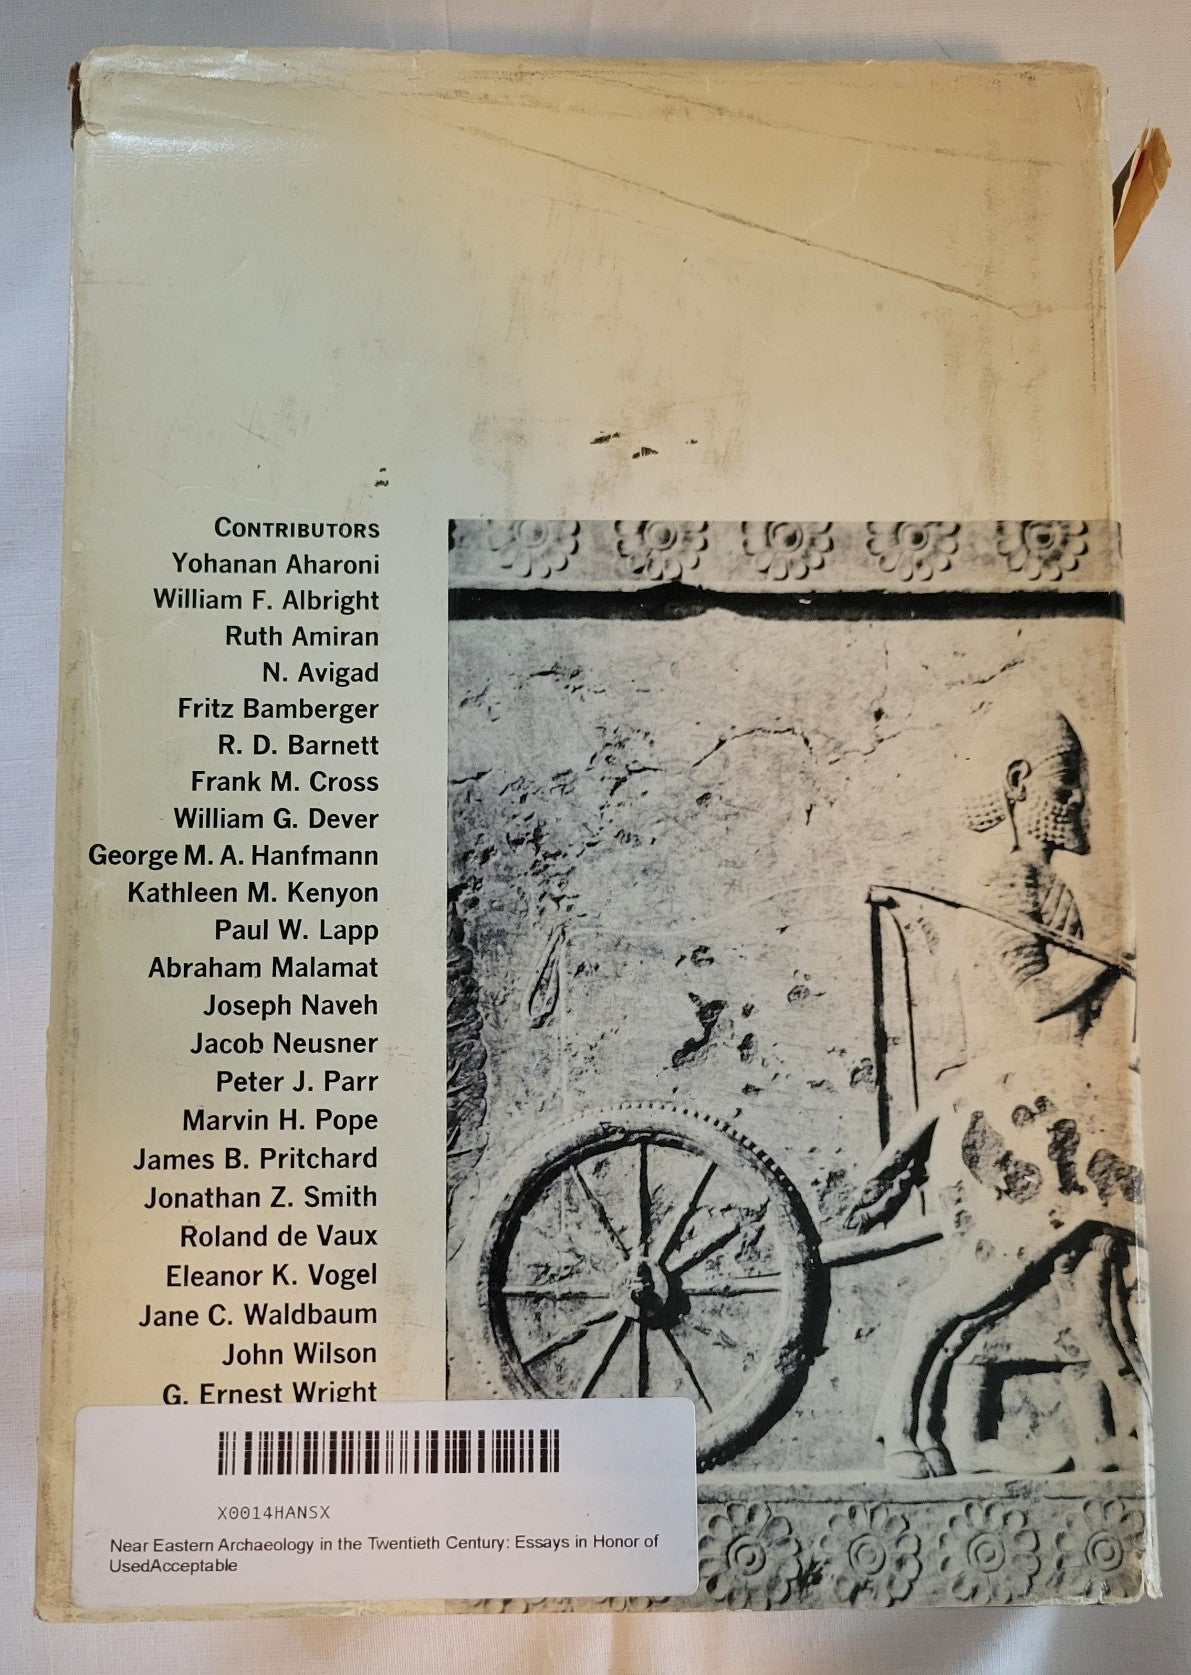 Used book for sale, “Near Eastern Archaeology in the Twentieth Century” edited by James A. Sanders, written in honor of Nelson Glueck. View of back cover.